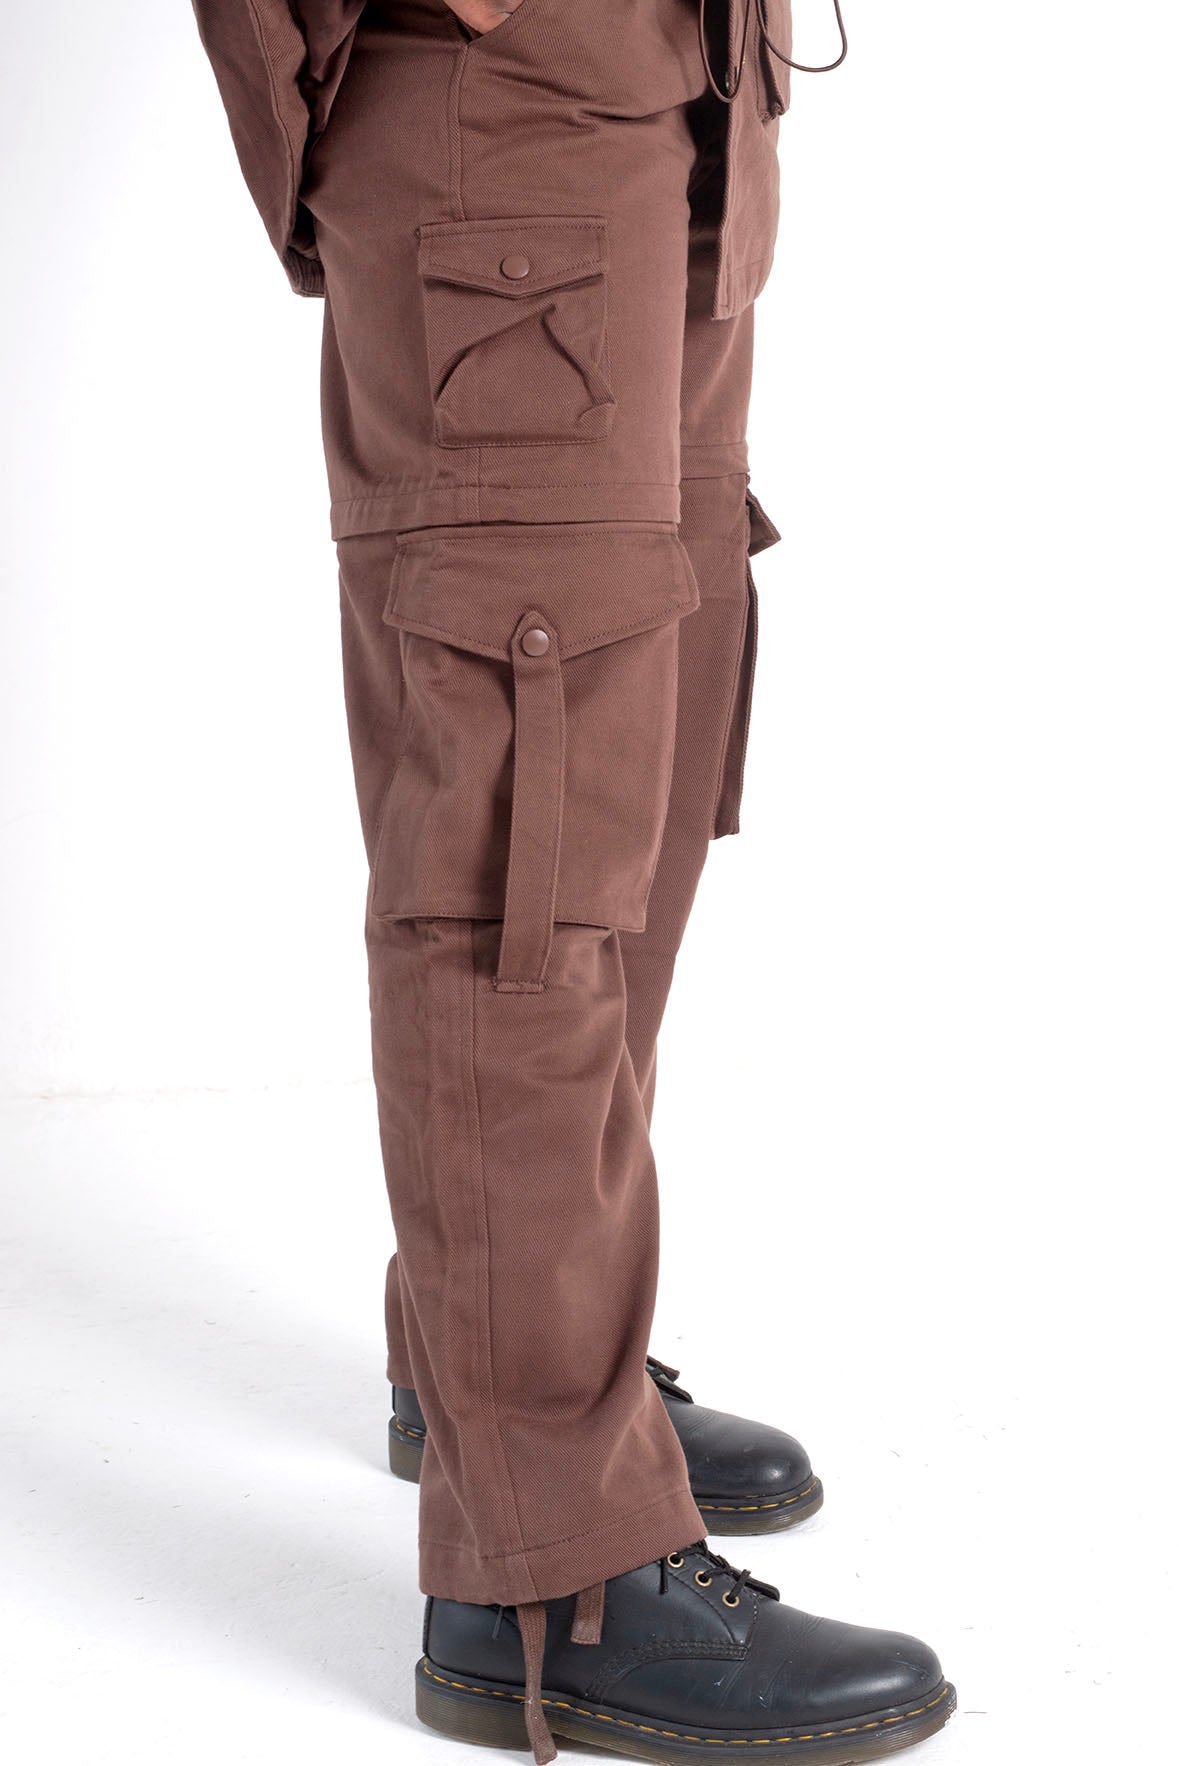 THE CARGO PANT